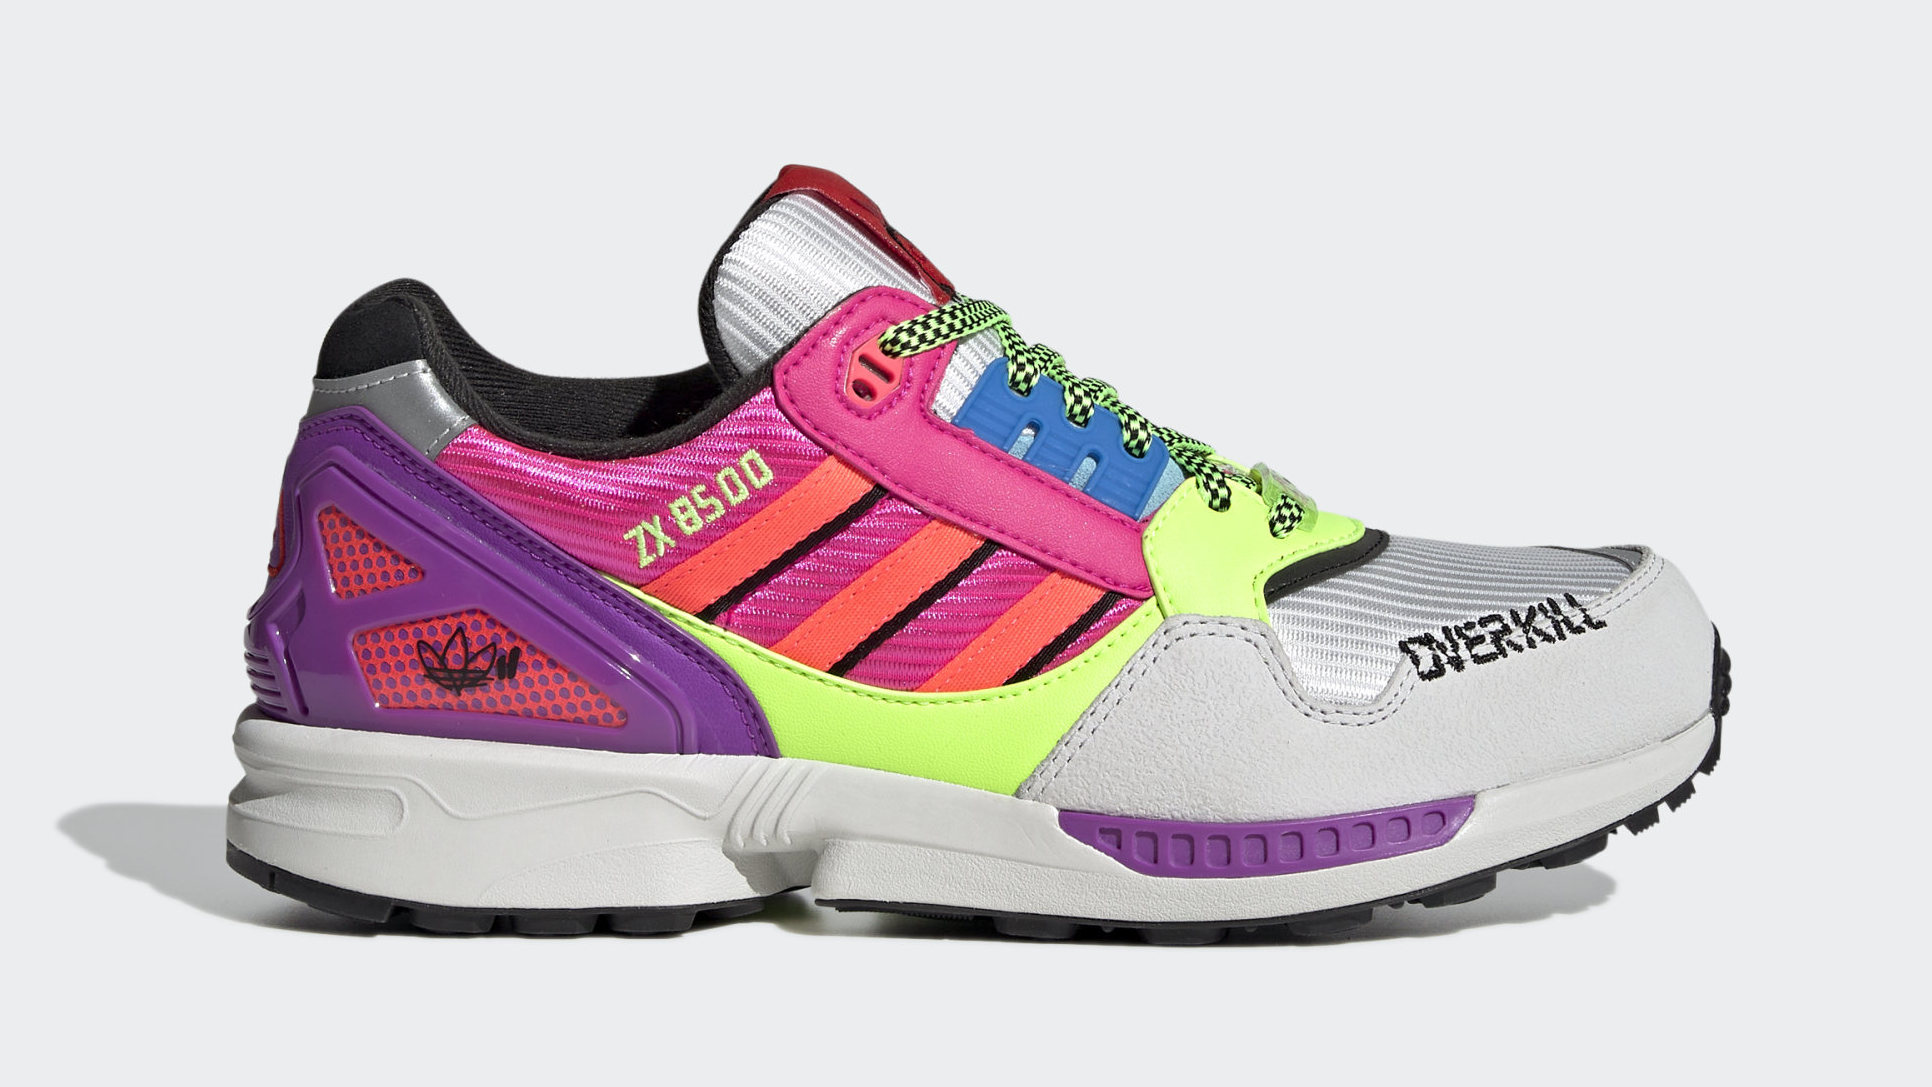 Overkill x Adidas ZX 8500 Medial Lateral